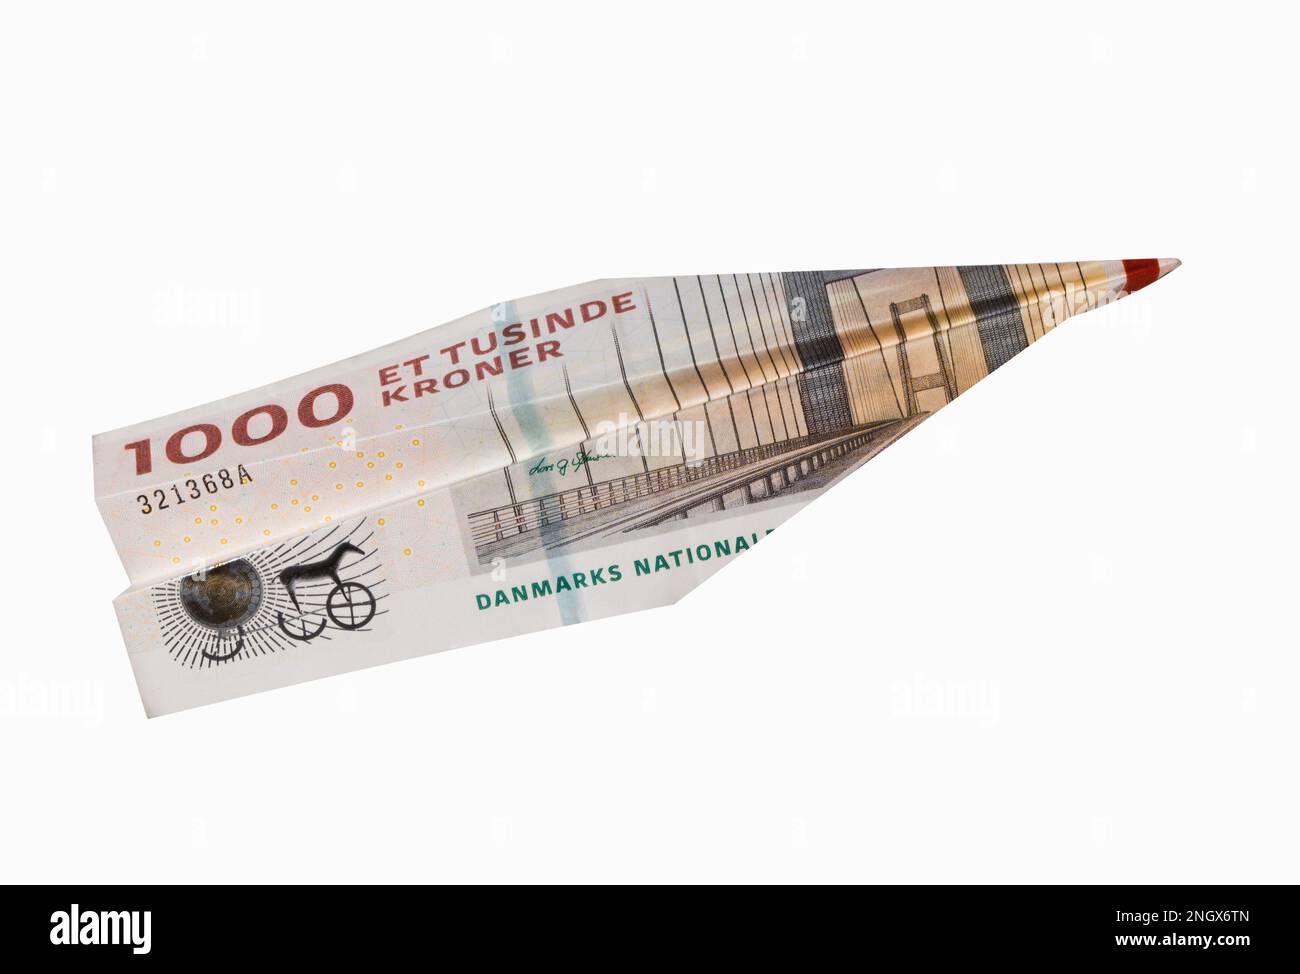 Cash Danish Krone banknote folded into airplane isolated on white background. Express DKK money transfer or bank payment. Travel cost in Denmark. Stock Photo